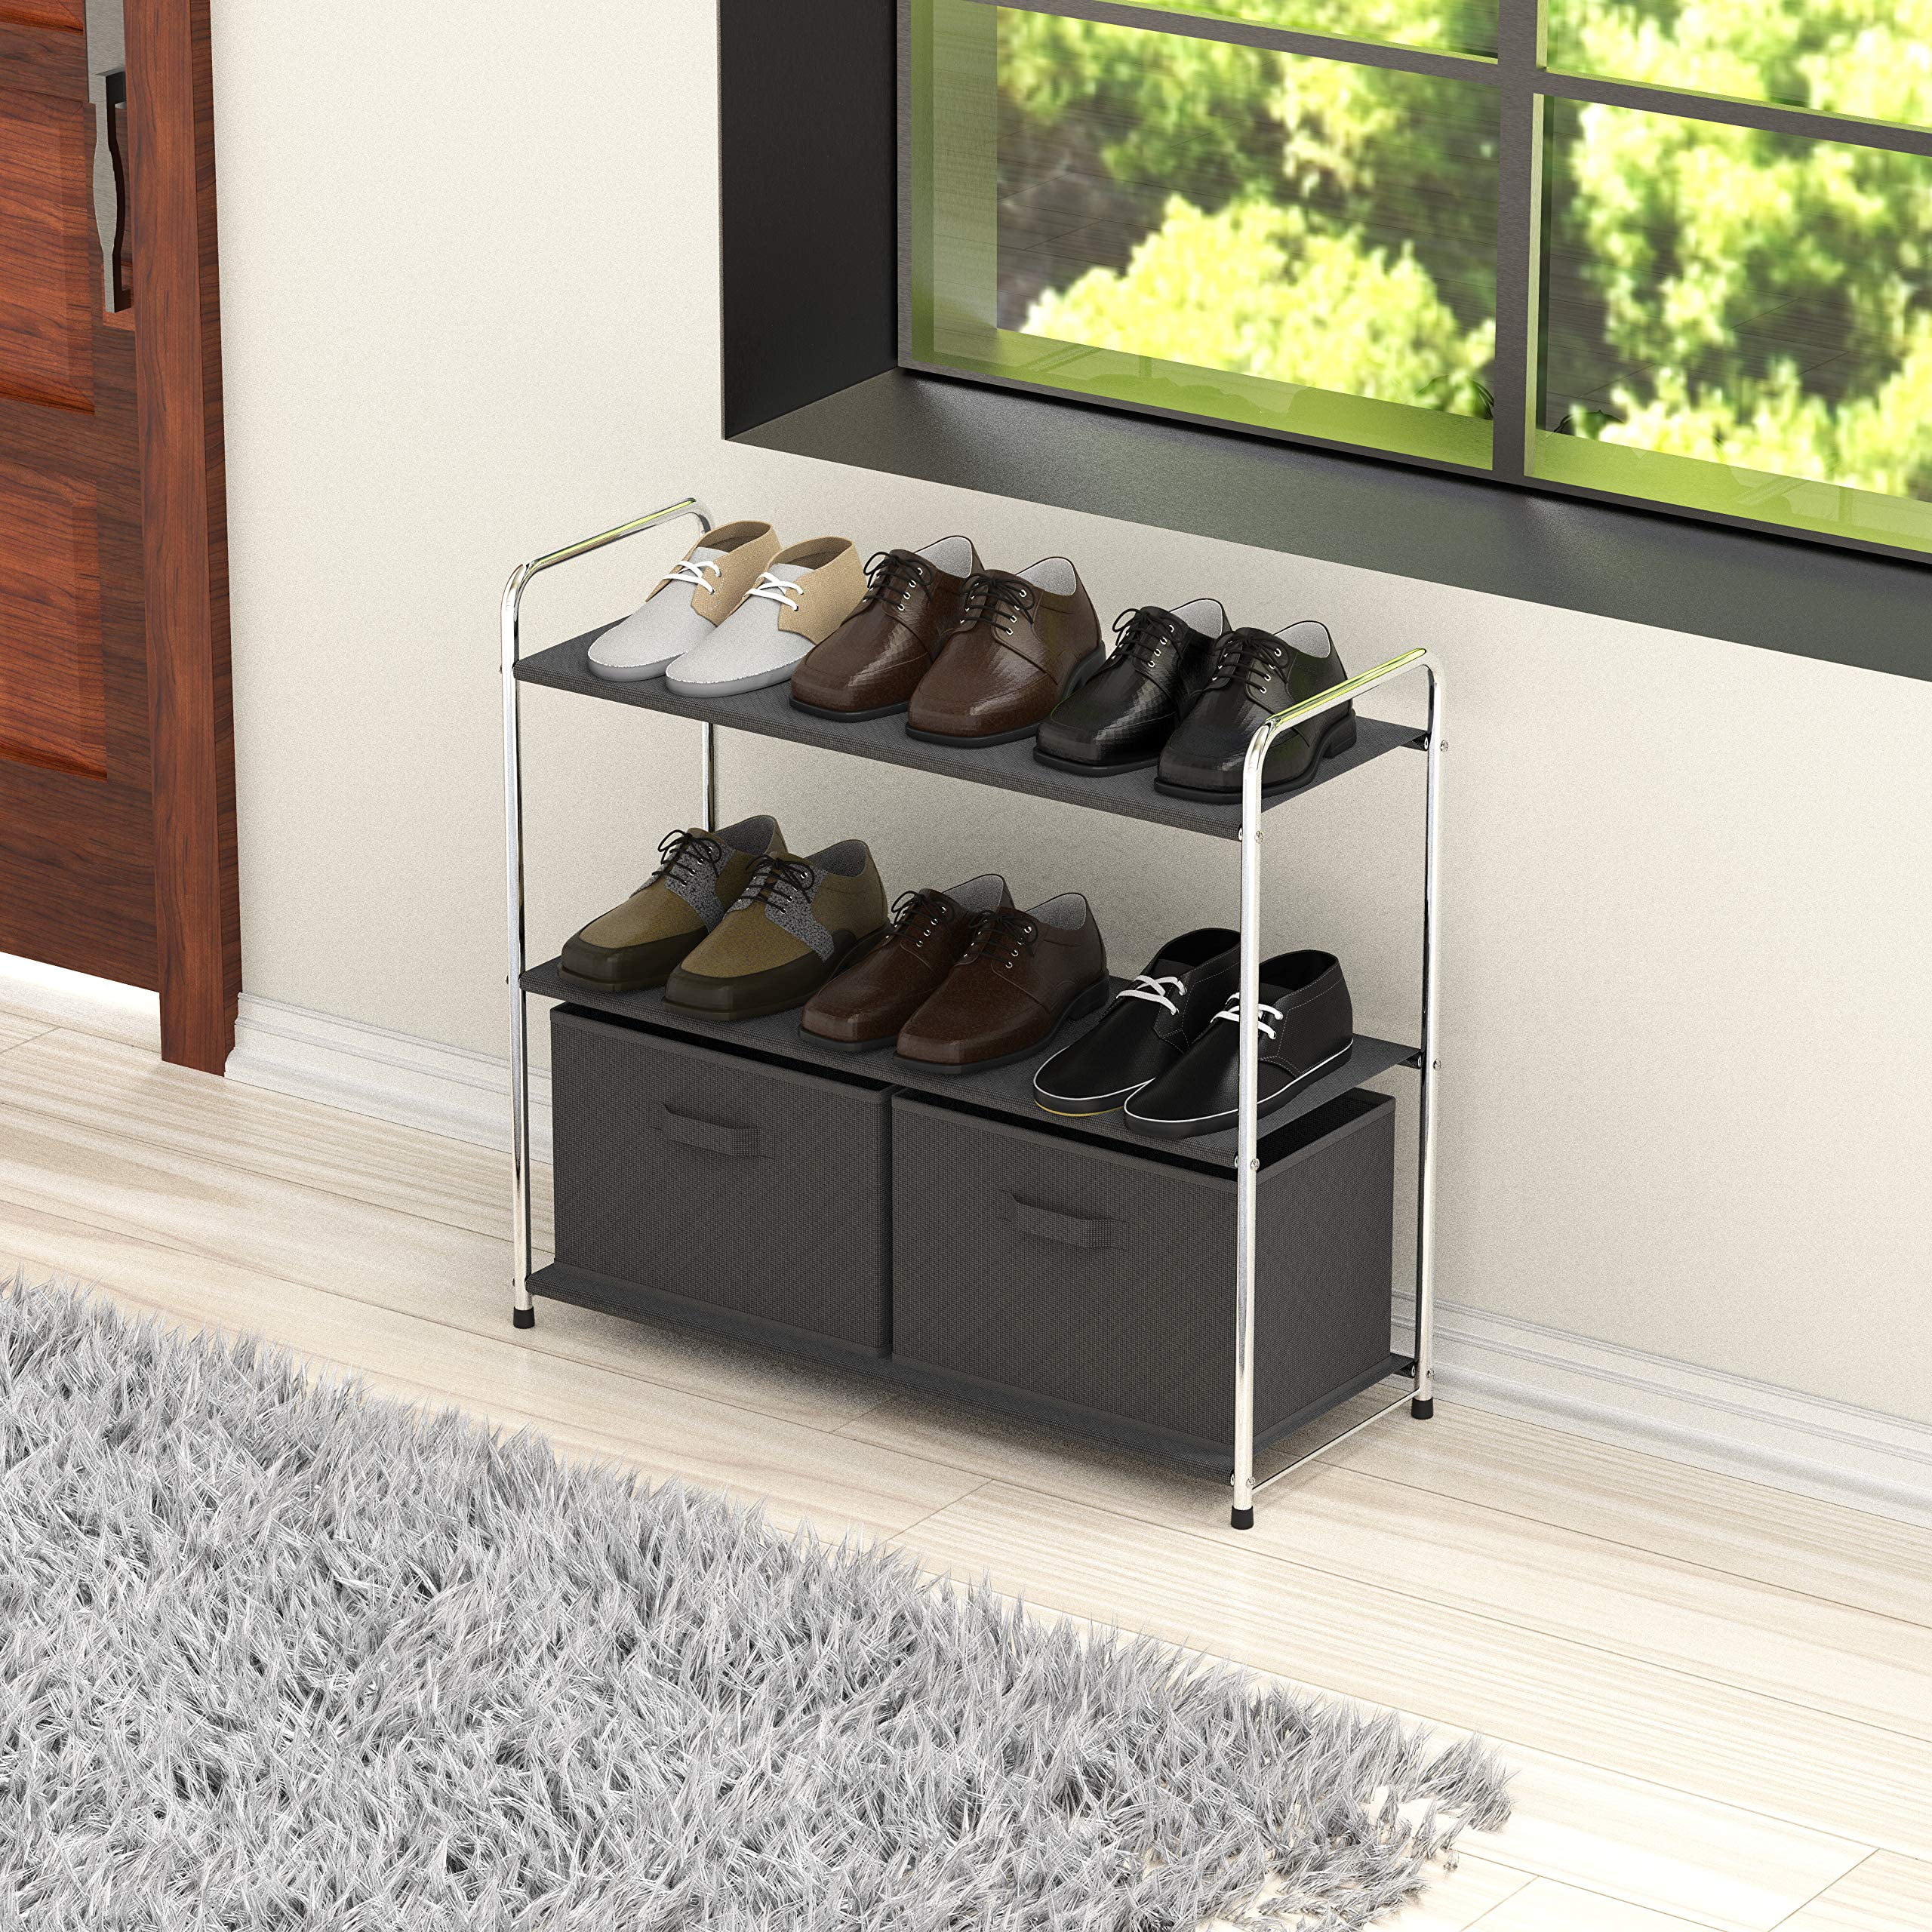 Simple Houseware 3-Tier Closet Storage with 2 Drawers, Elegant Silver Finish